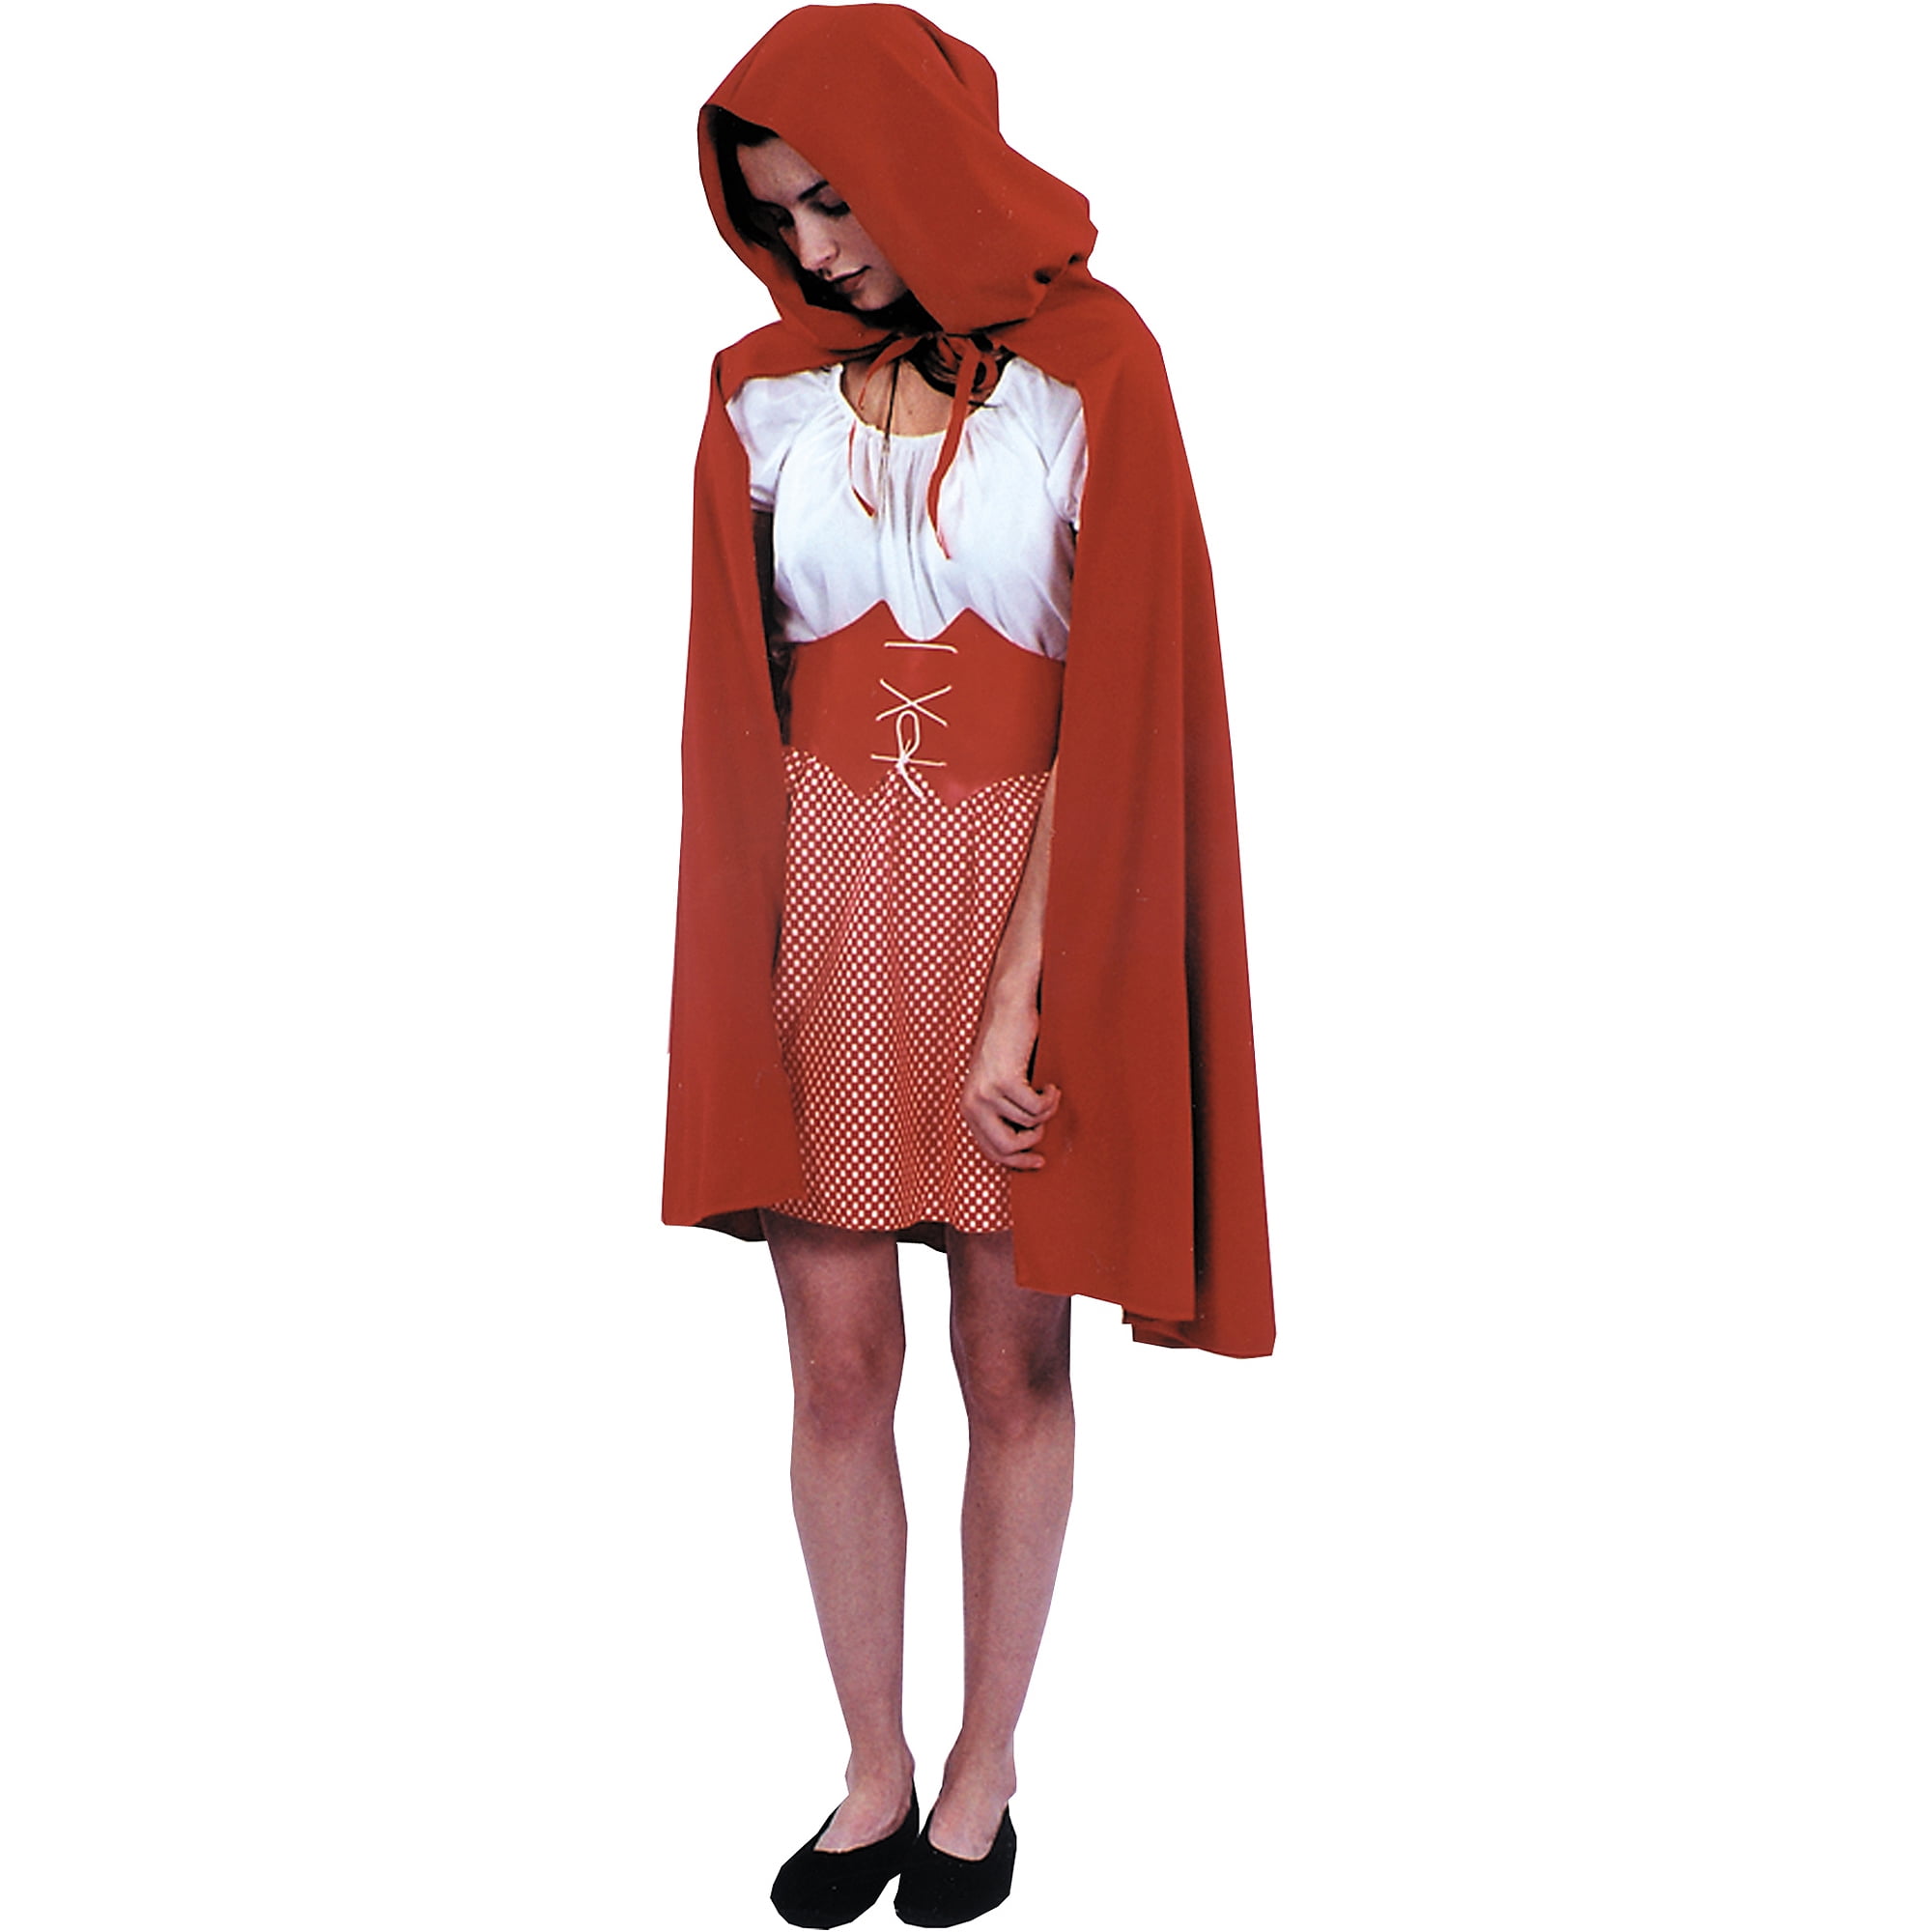 Hooded Cape XL 12 14 Adult Red Riding Hood Costume Fairy-tale Fancy Dress 